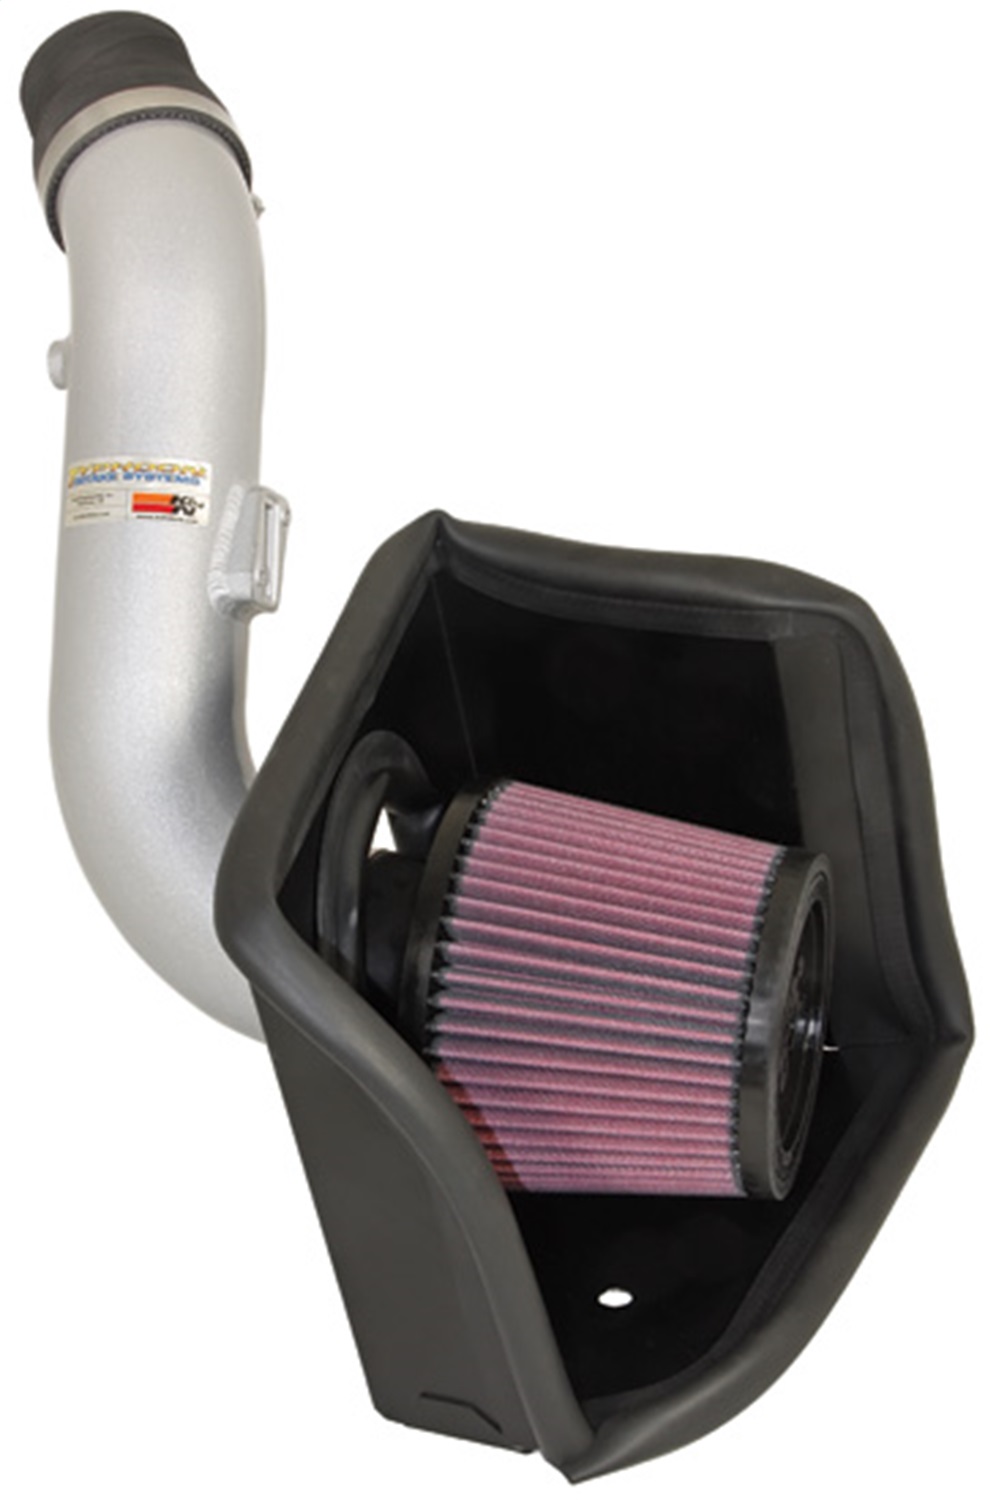 K&N Filters K&N Filters 69-3515TS Typhoon; Cold Air Intake Filter Assembly Fits 06-09 Fusion